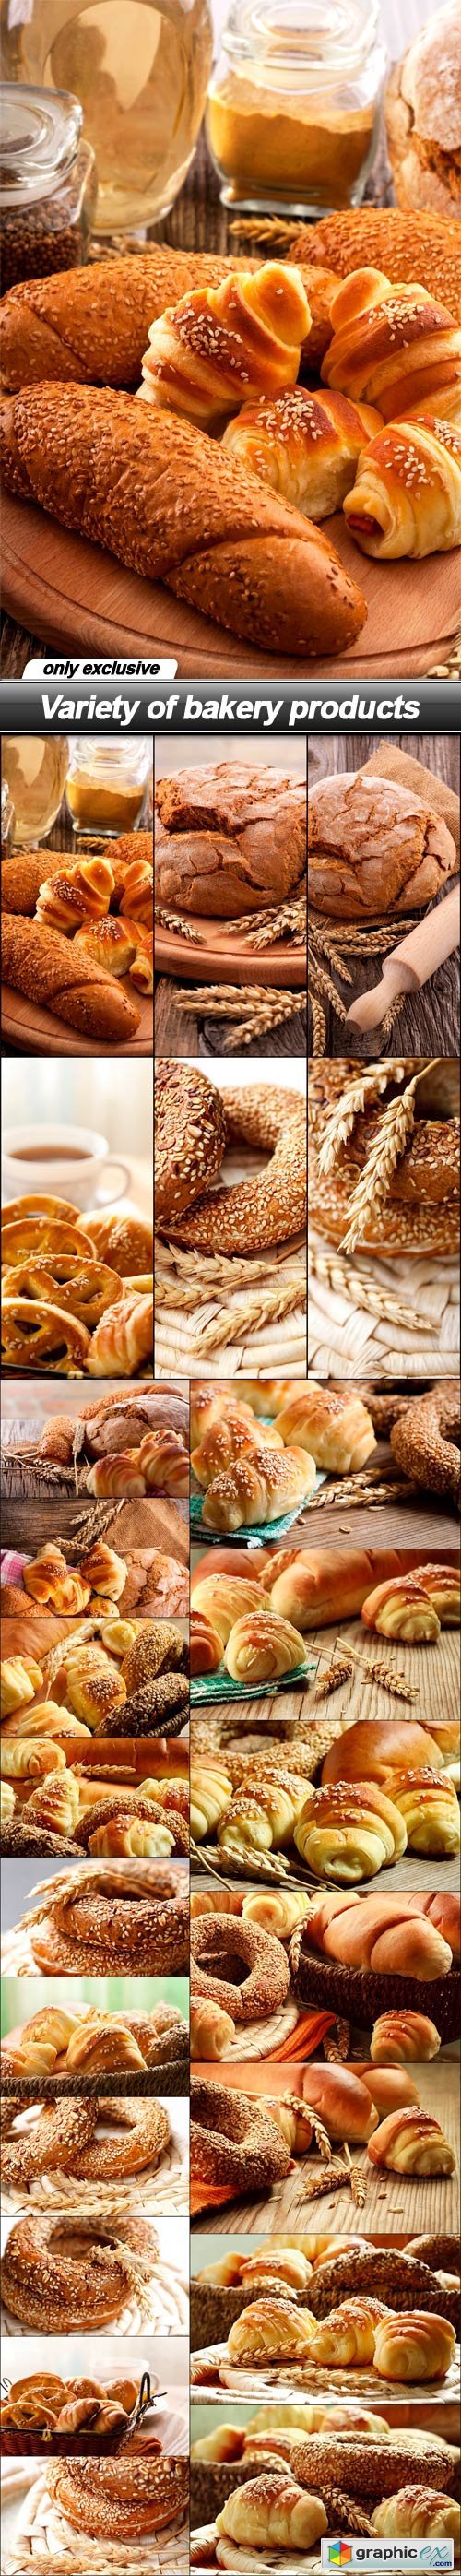 Variety of bakery products - 23 UHQ JPEG